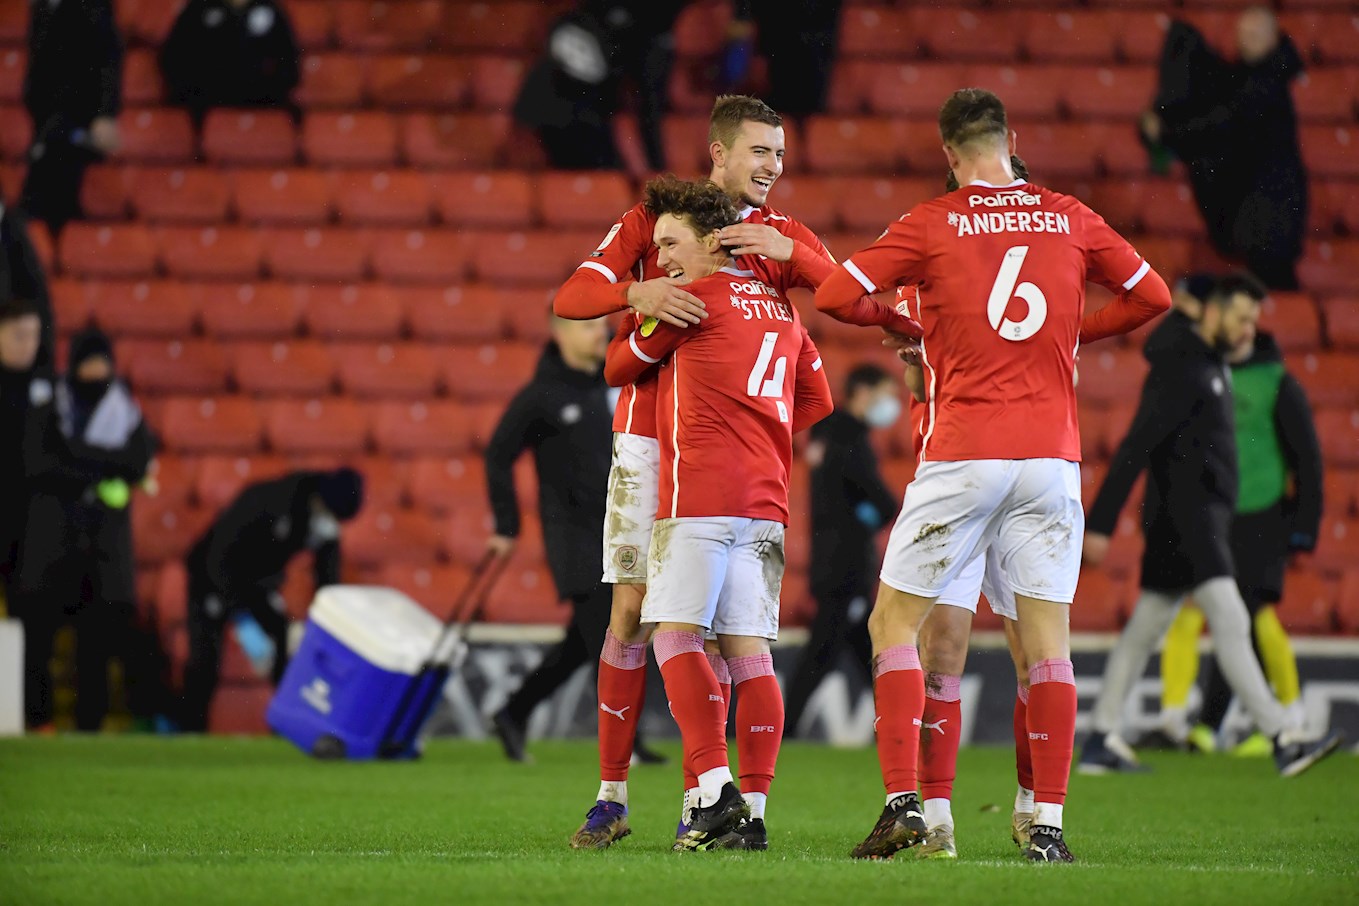 The Red celebrate at full-time against Huddersfield Town